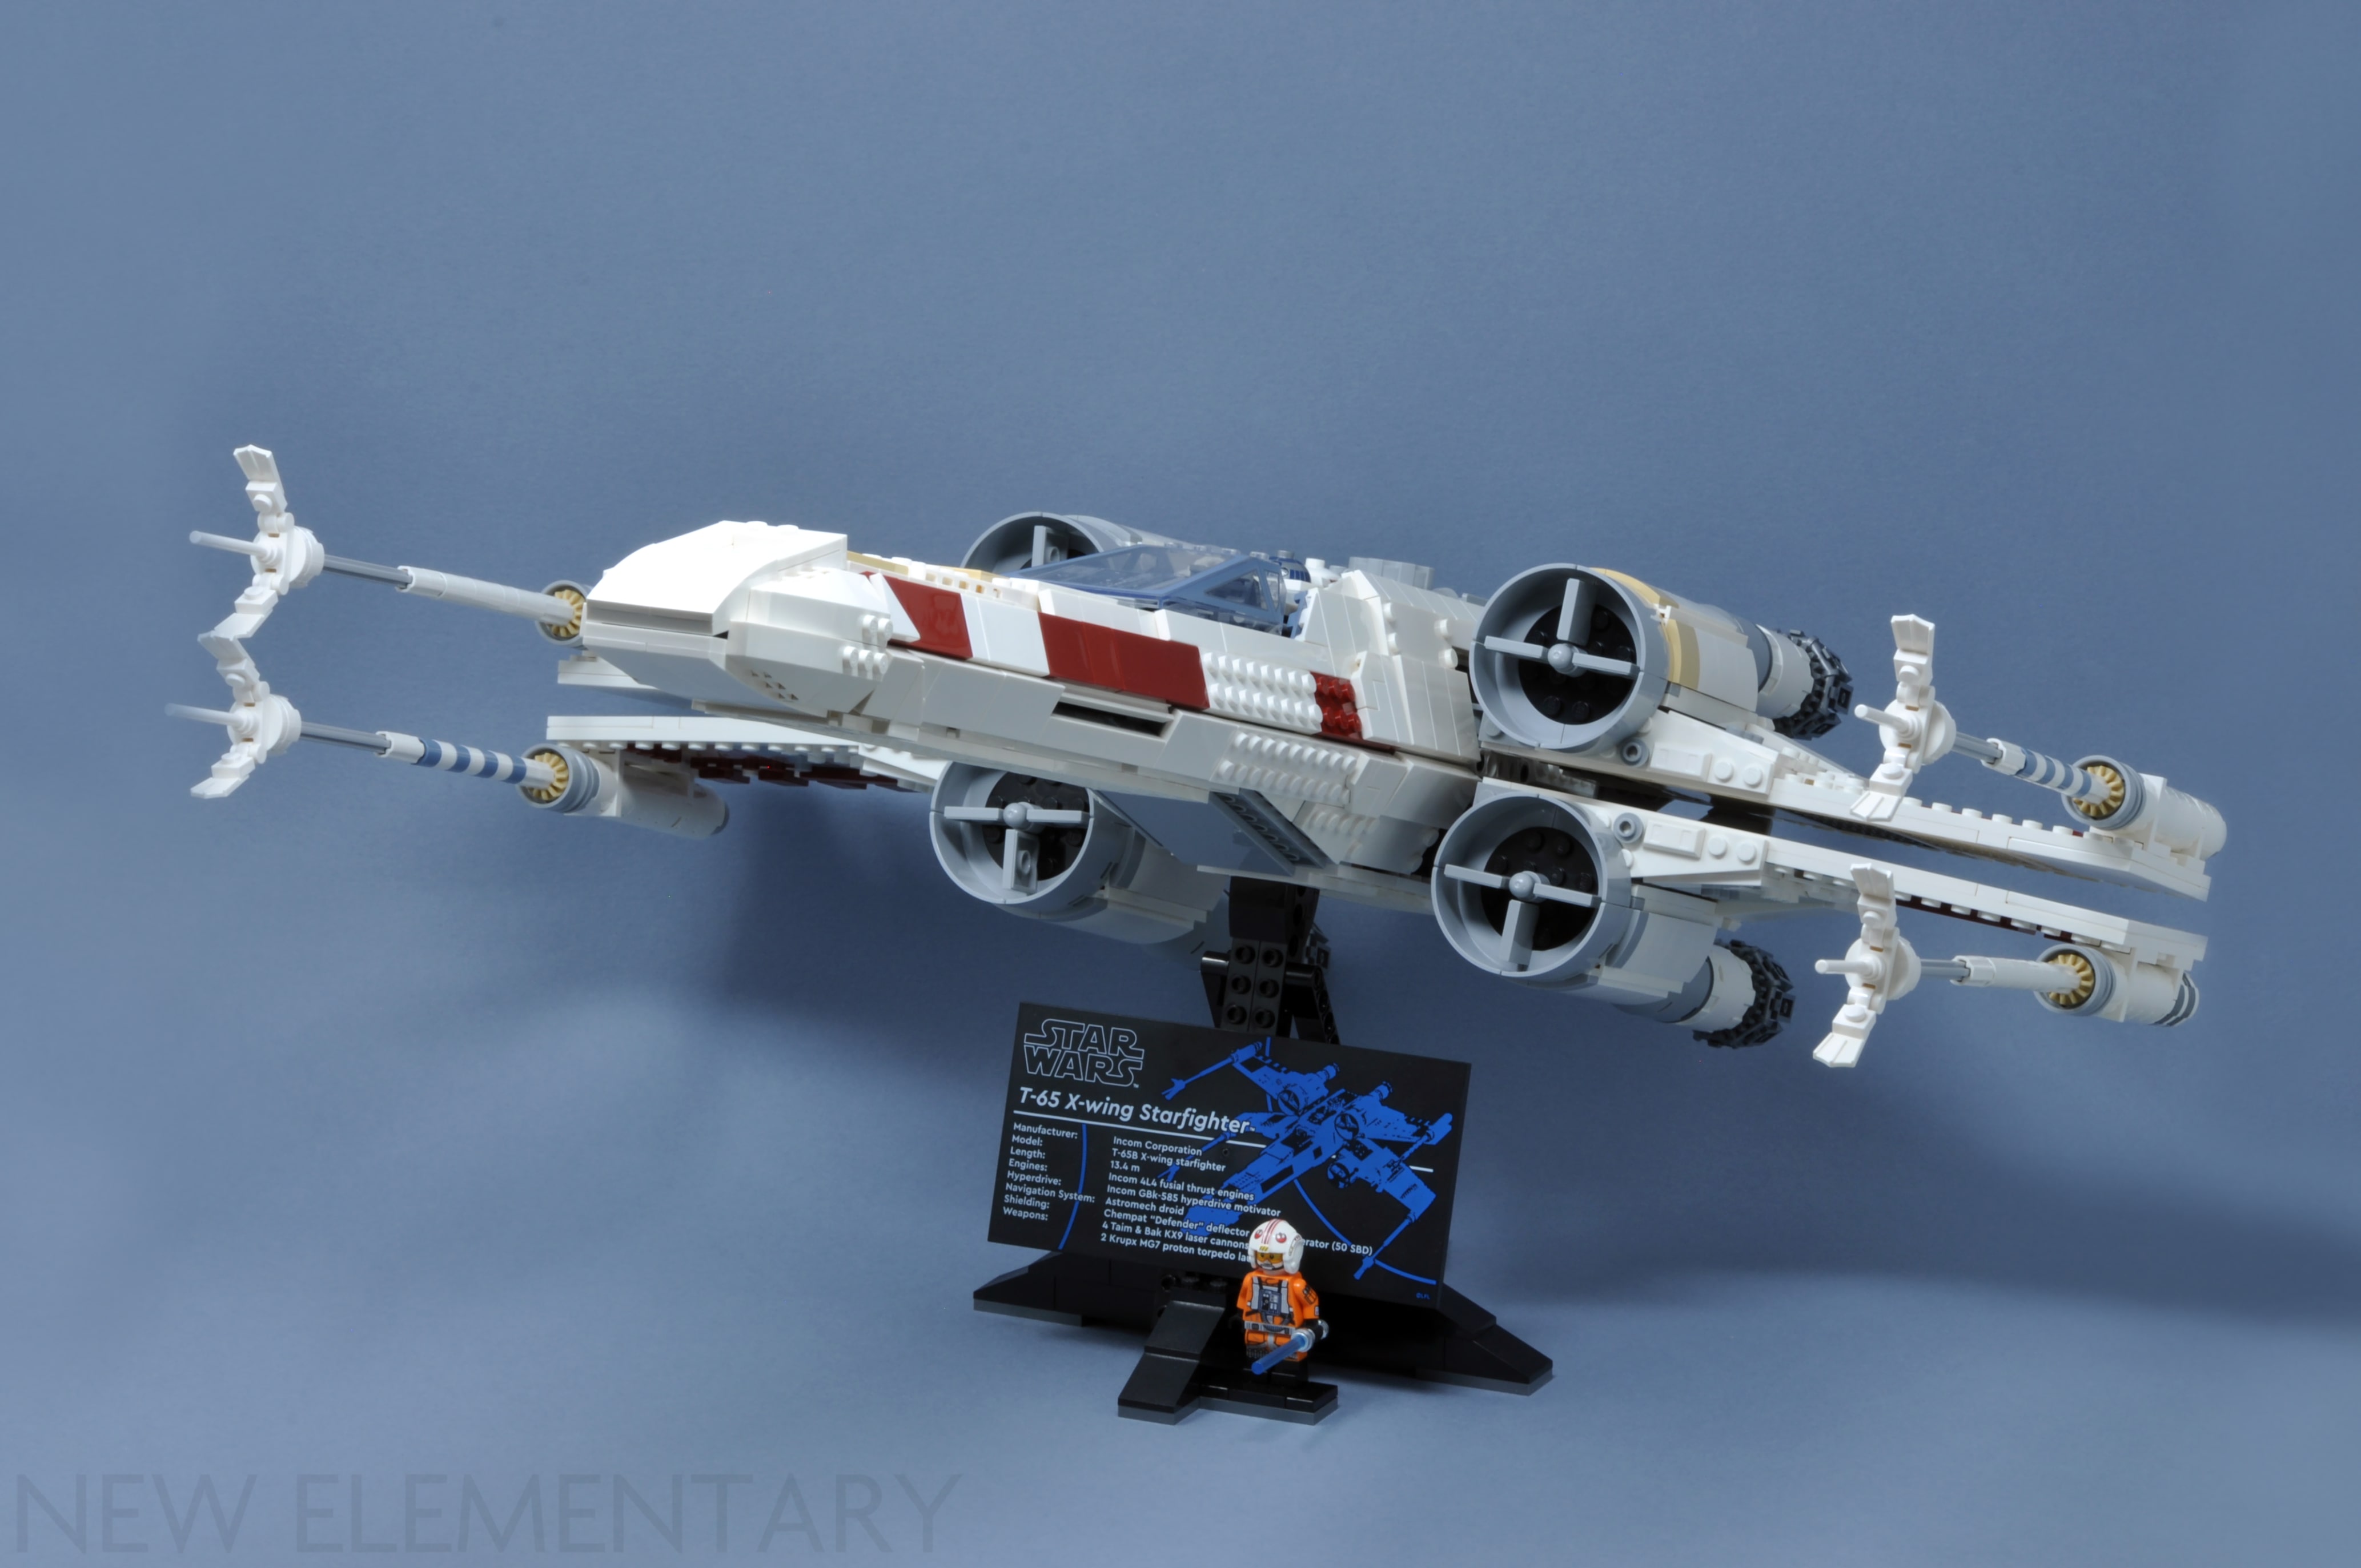 The LEGO Star Wars UCS X-Wing Starfighter Is 22 Long